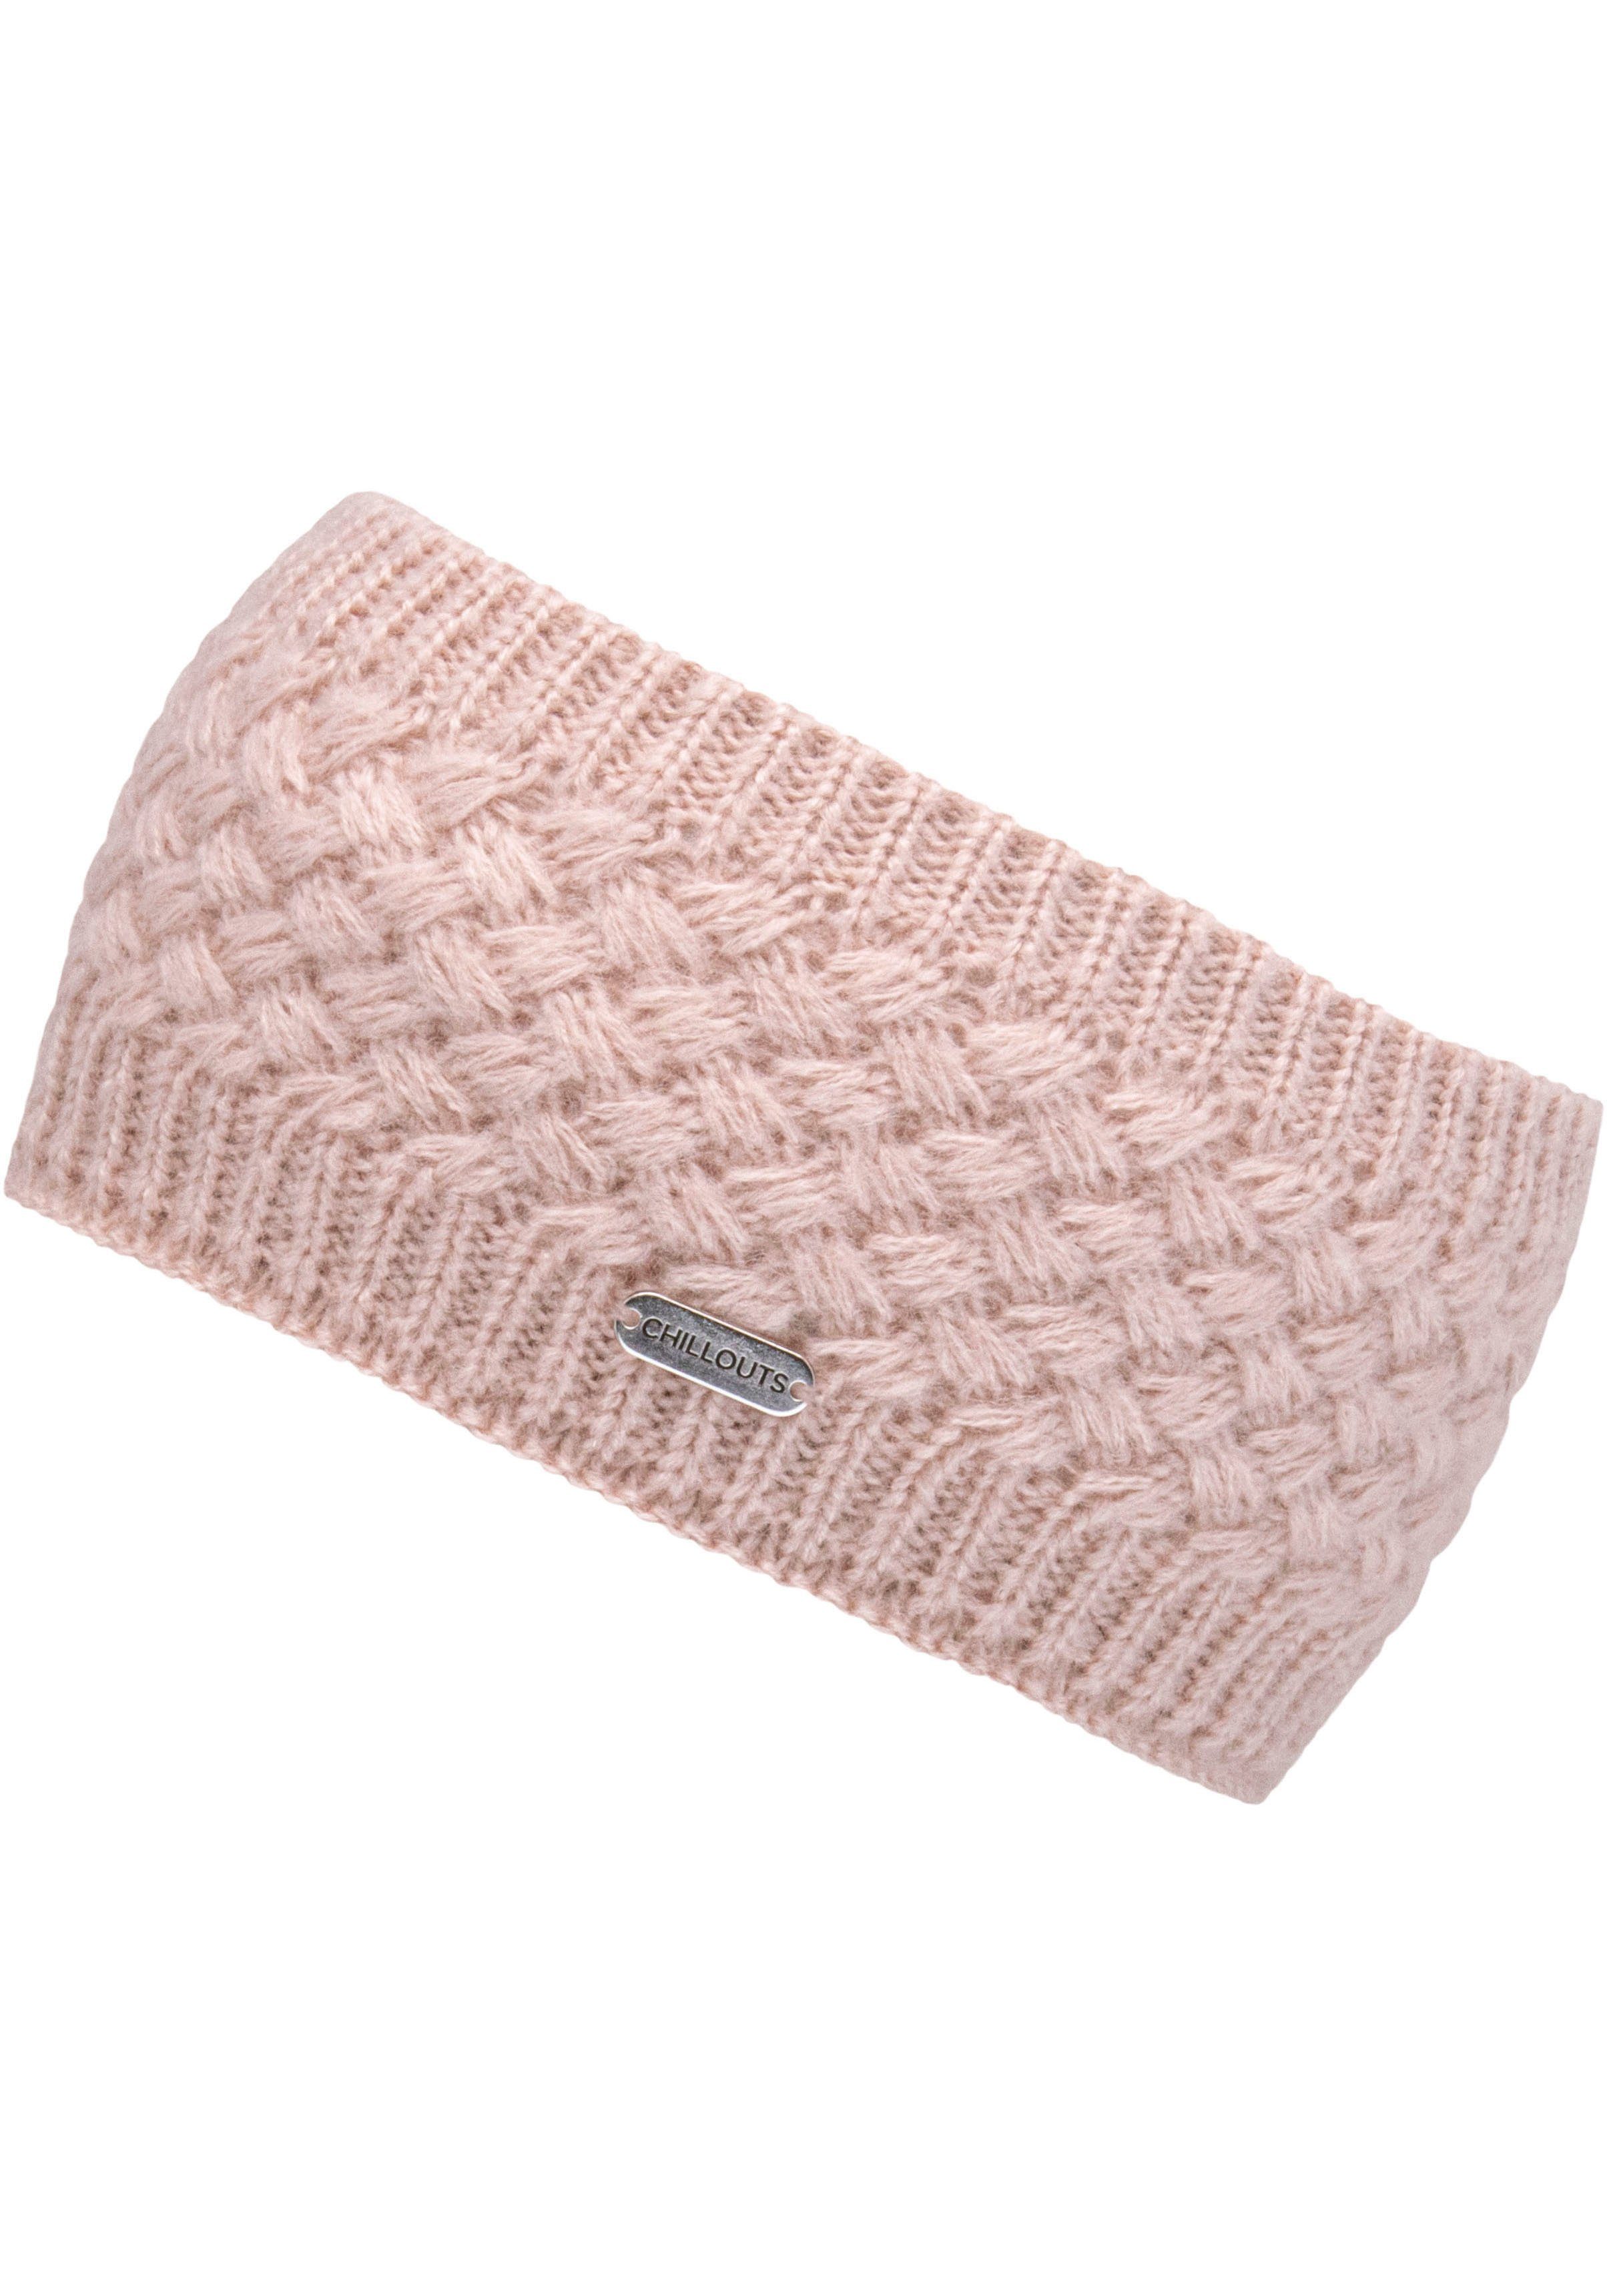 chillouts Felicitas Stirnband rose Metall-Label Headband